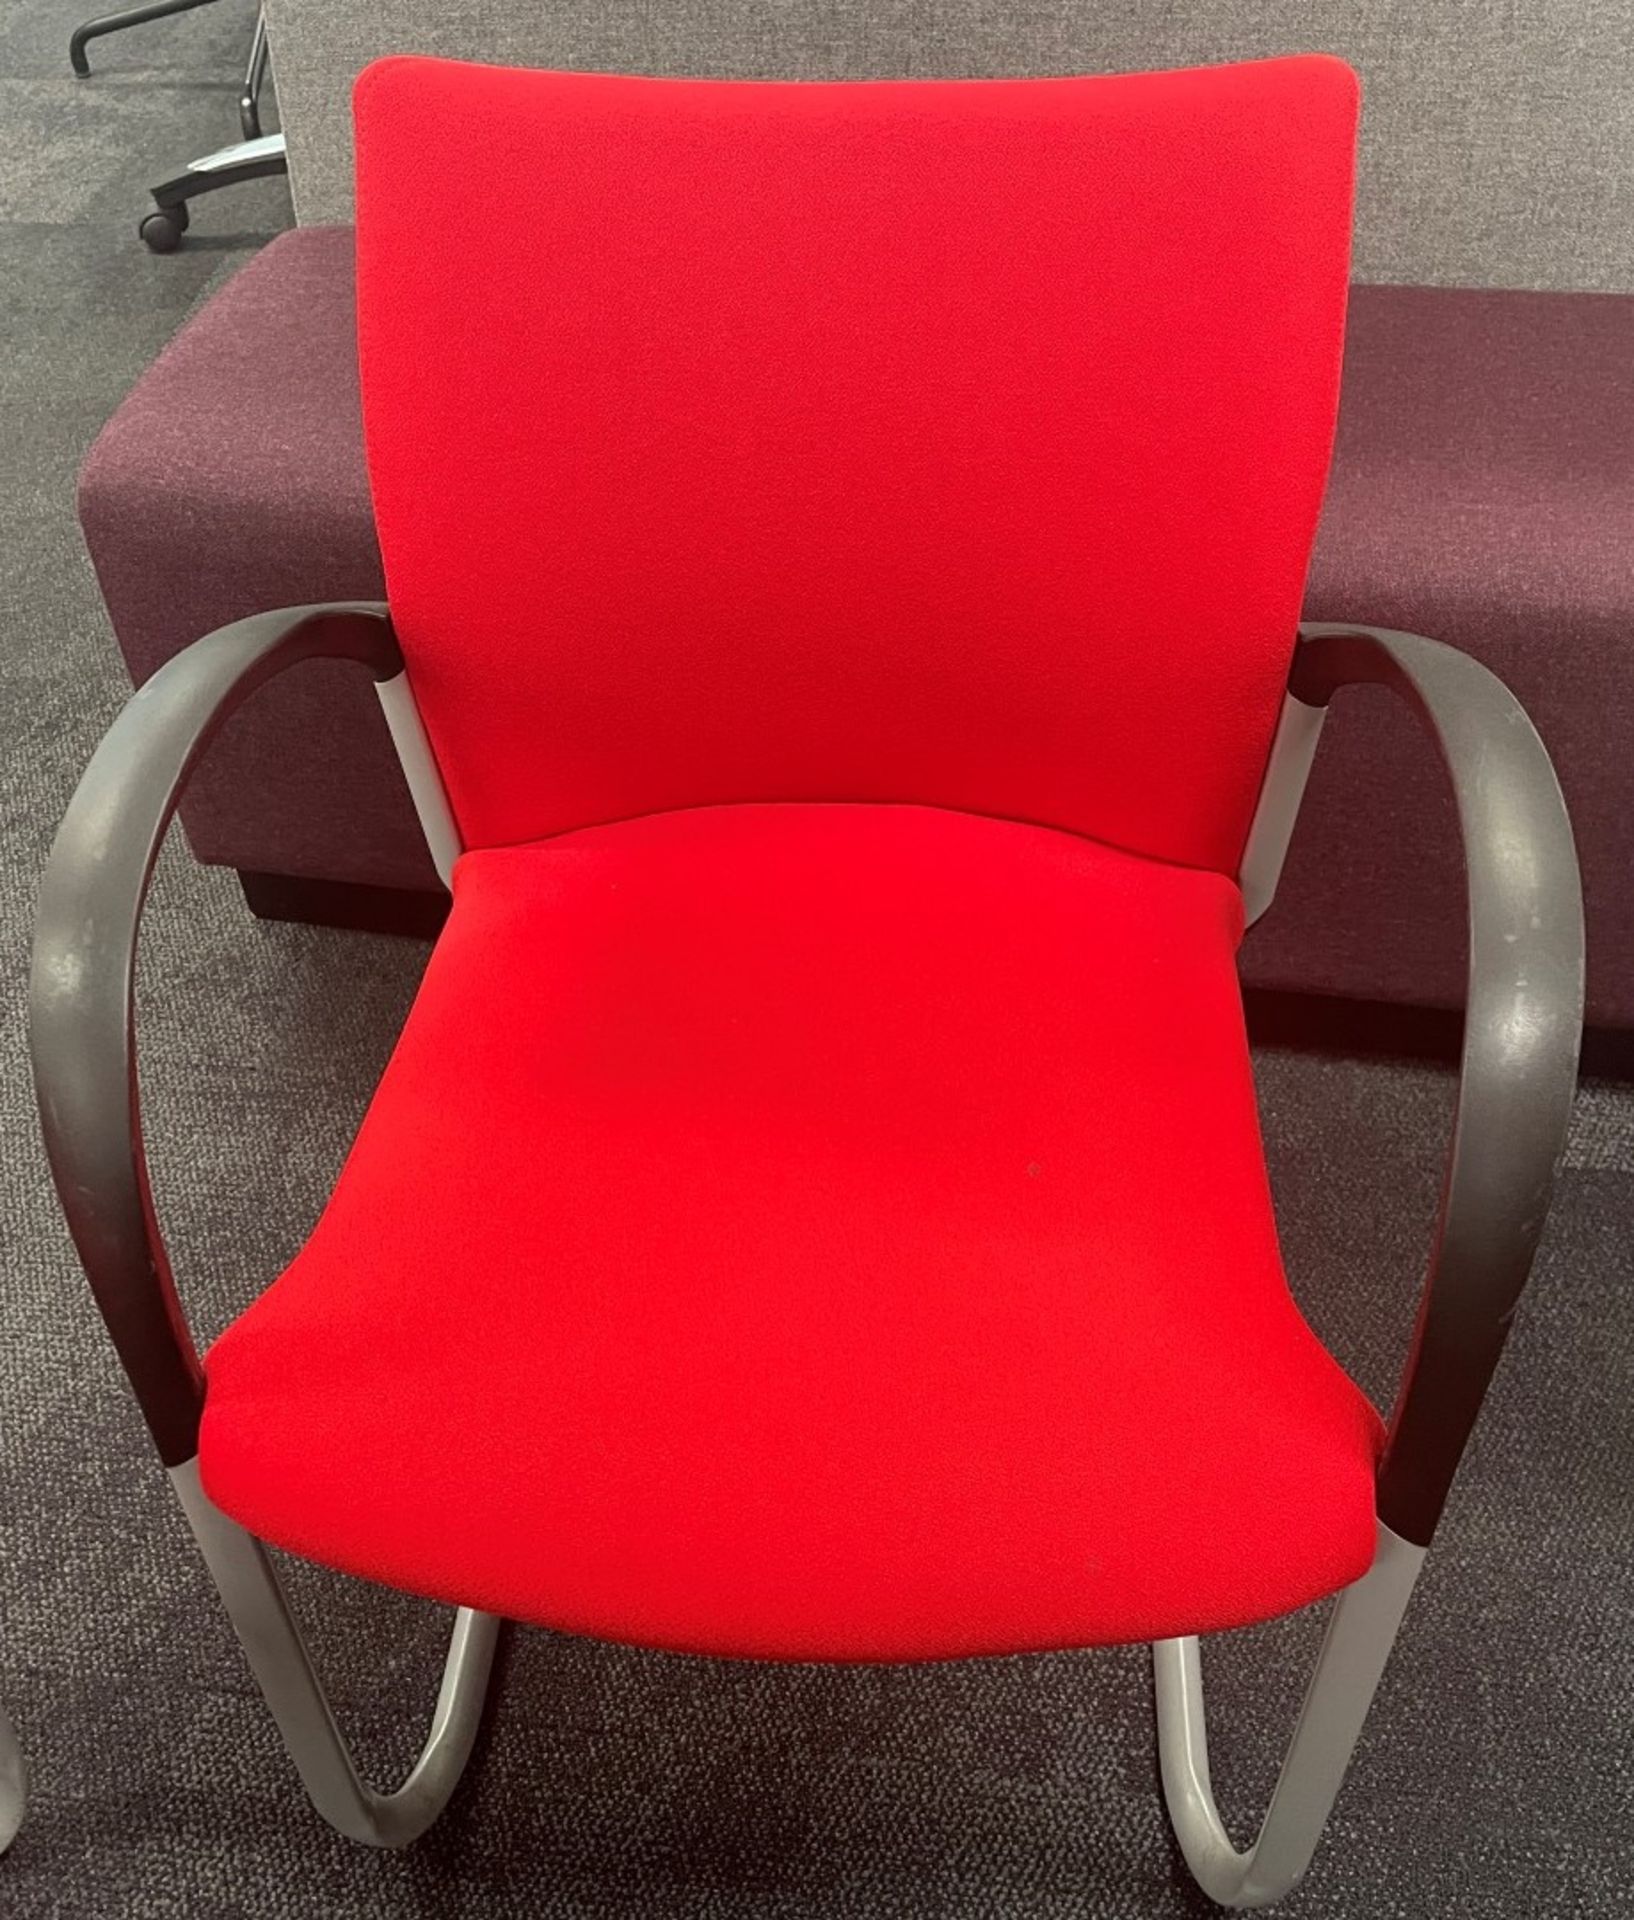 1 x 2-Metre Long Boardroom Table With 8 x Red Senator Chairs - To Be Removed From An Executive - Image 9 of 18